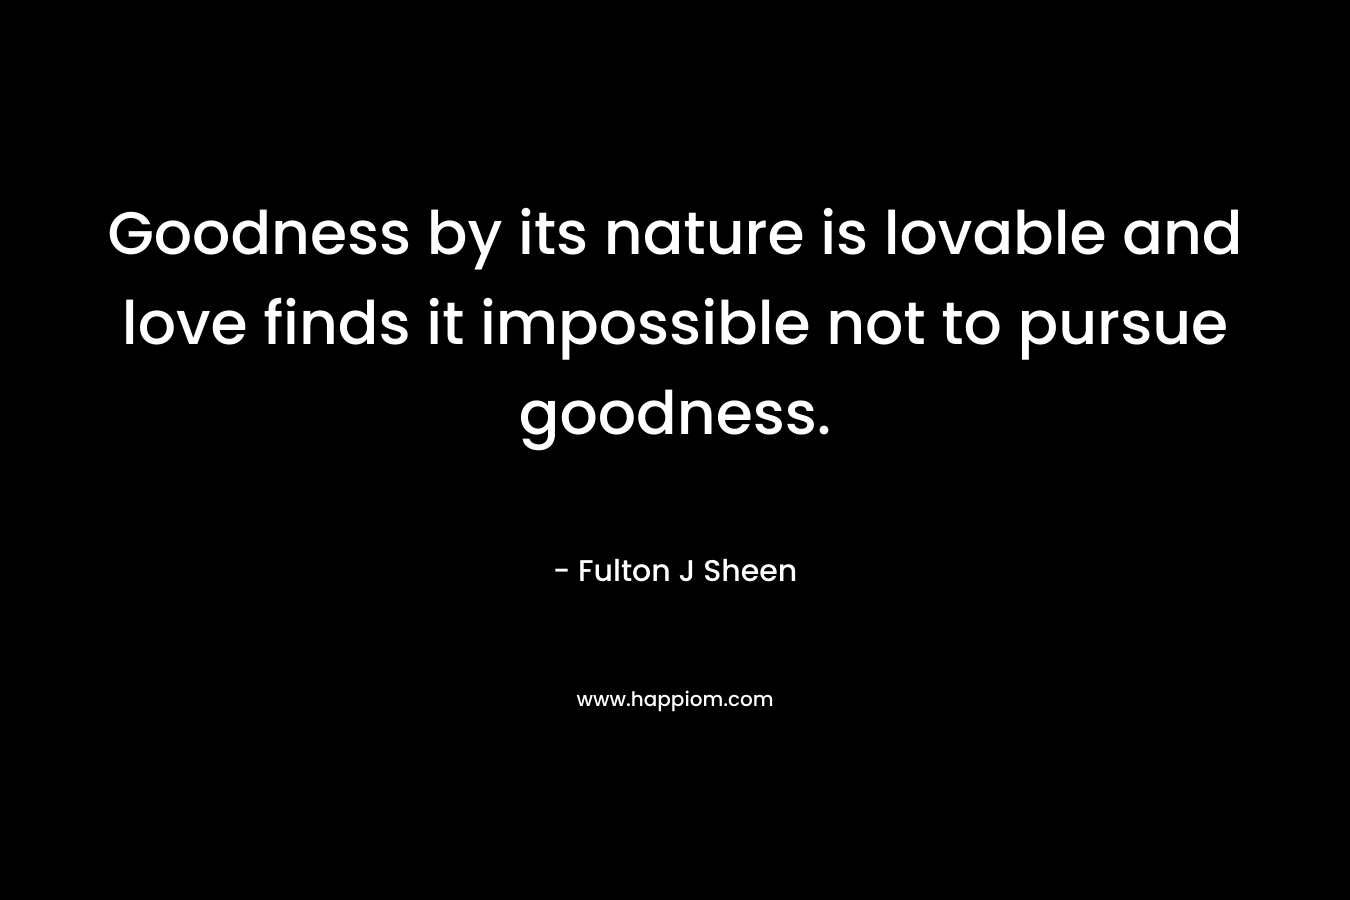 Goodness by its nature is lovable and love finds it impossible not to pursue goodness. – Fulton J Sheen